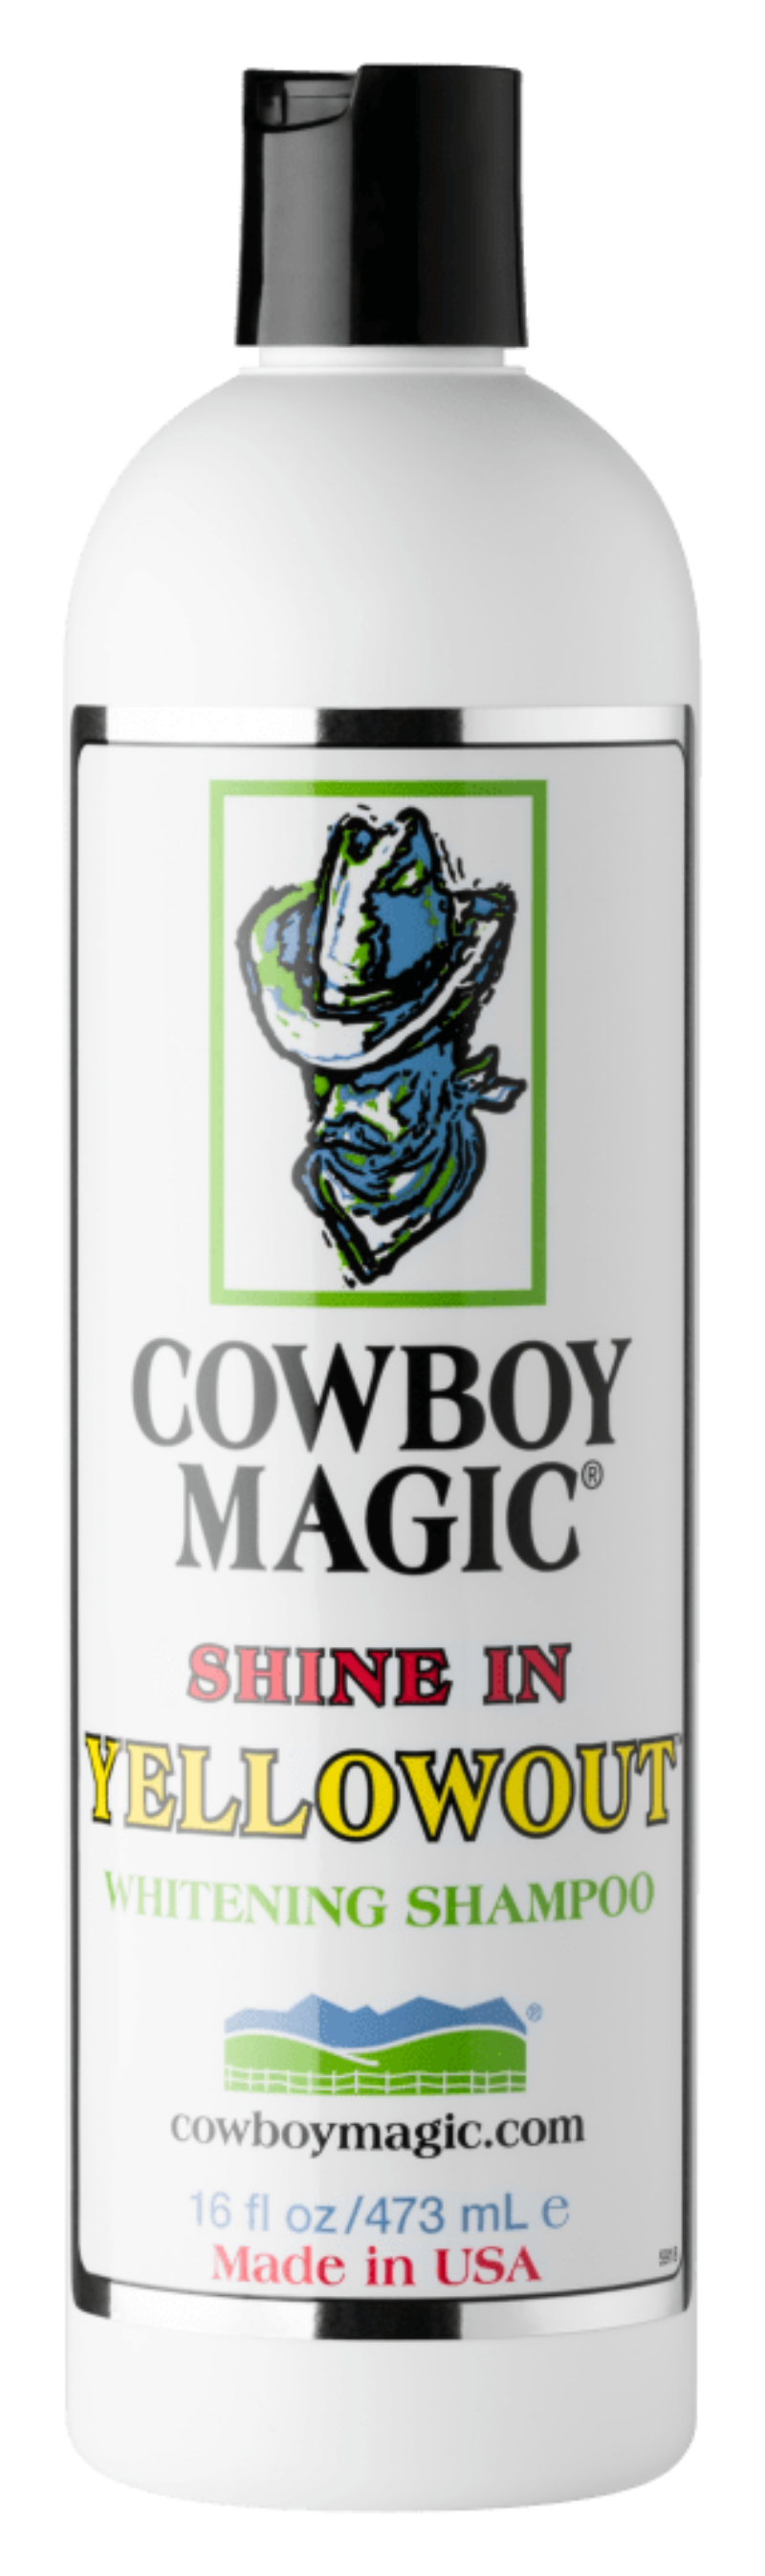 Cowboy Magic Show Preparation 473ml Cowboy Magic Yellow Out Stain Remover